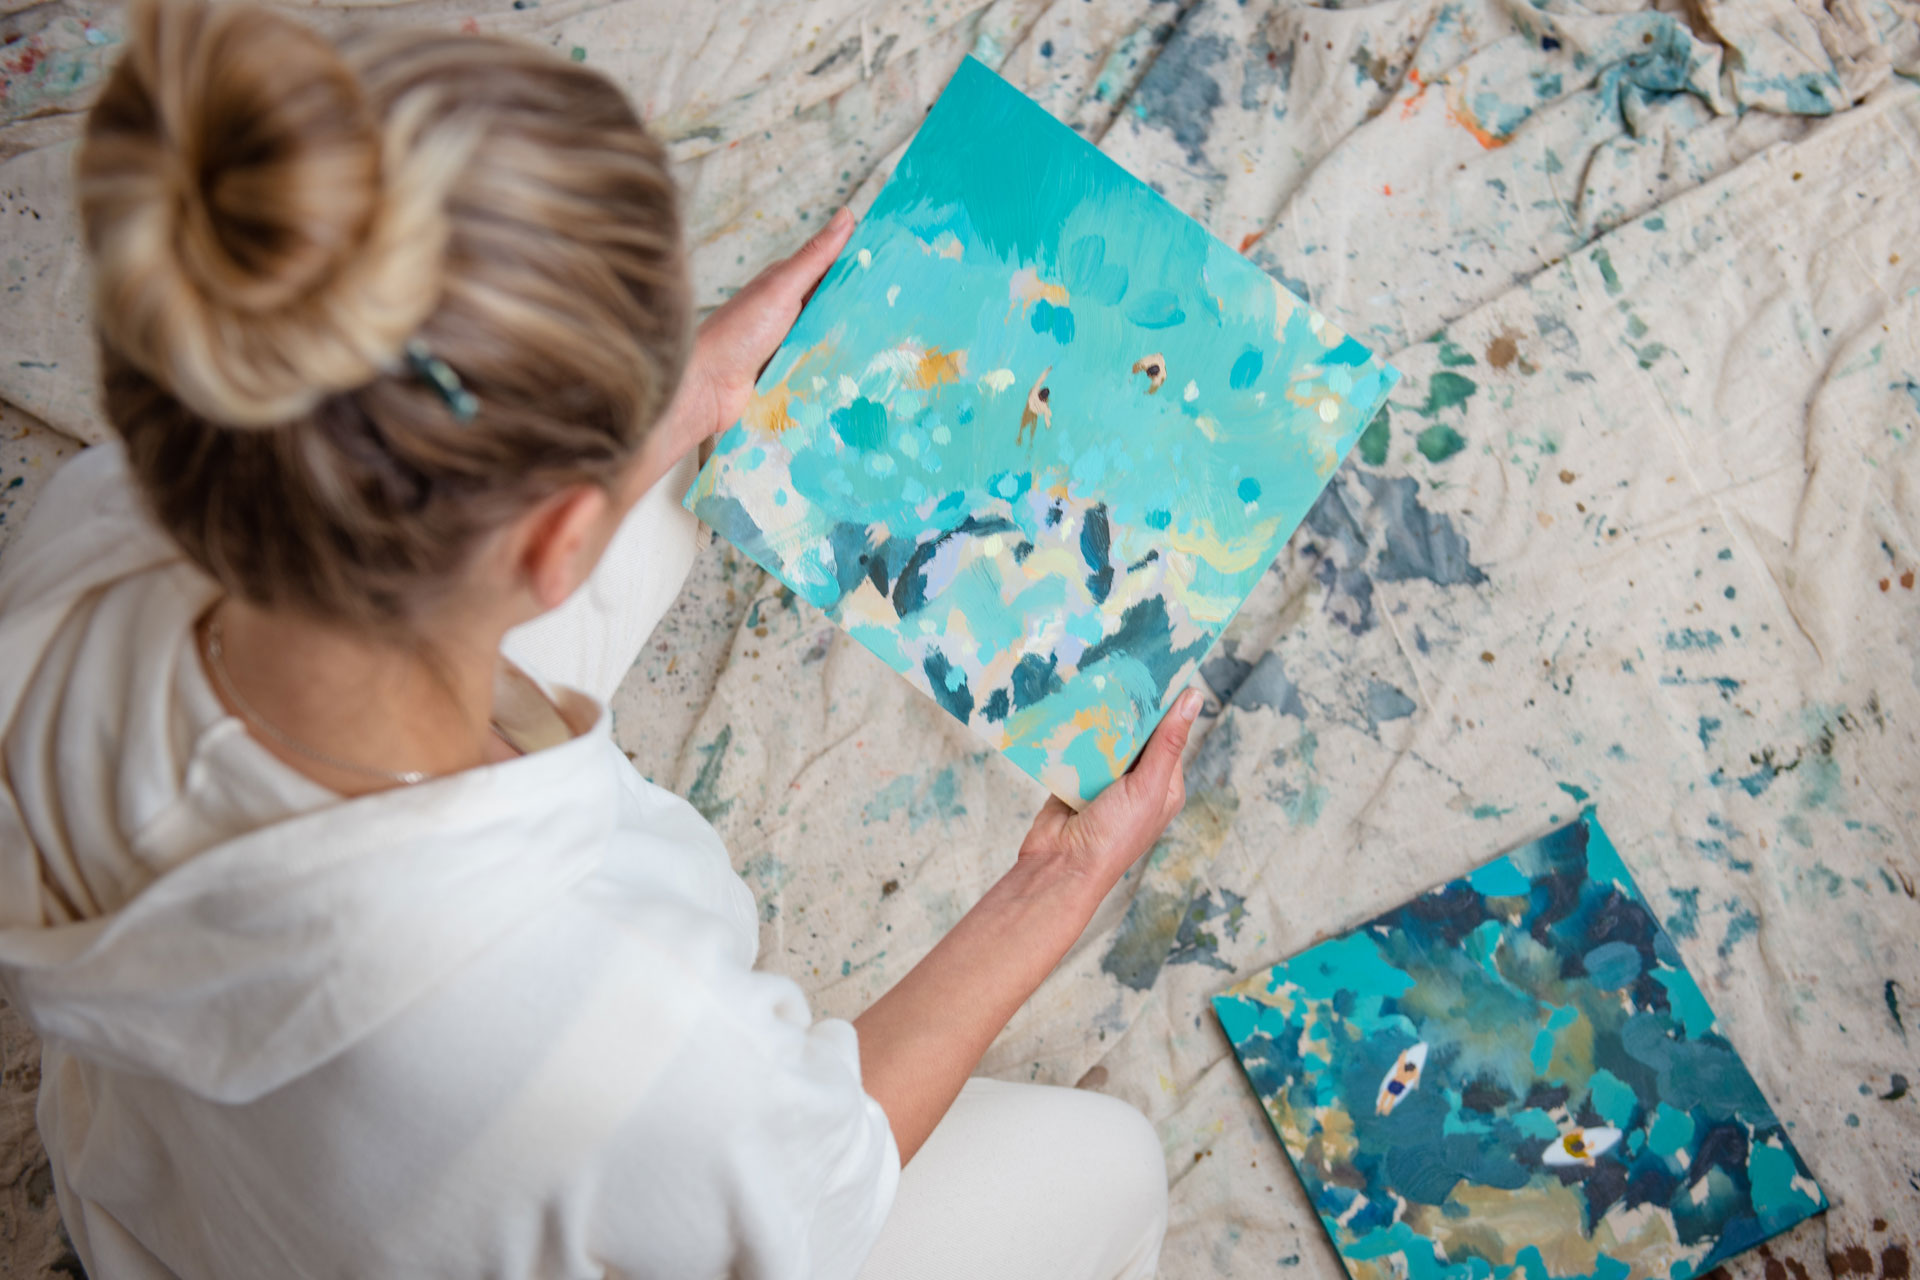 coastal artist Nina Brooke holds one of her seascape paintings in an artists studio